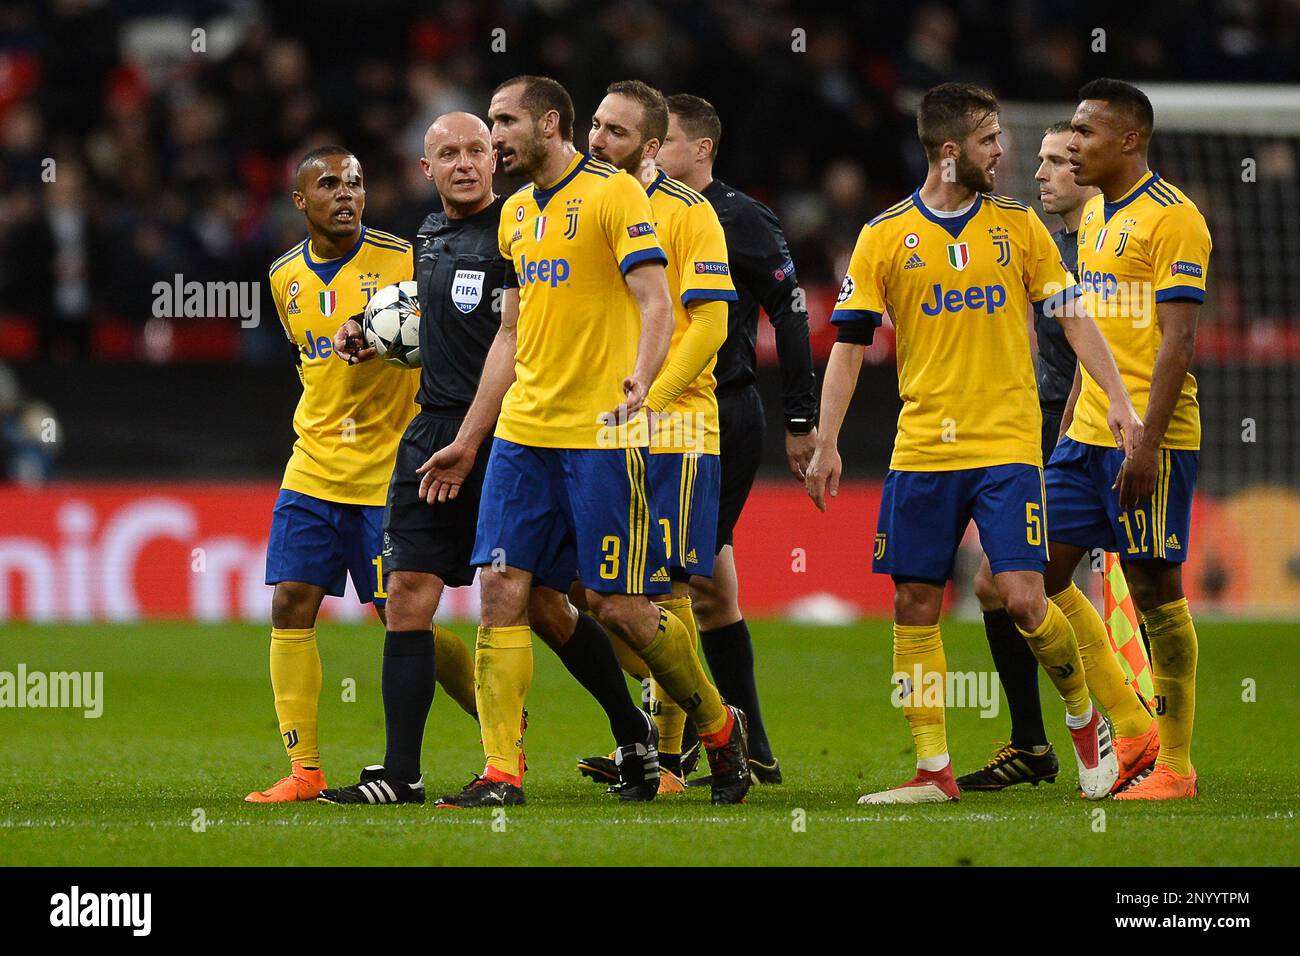 Juventus players surround the Match Referee Szymon Marciniak at half-time as the players leave the pitch - Tottenham Hotspur v Juventus, UEFA Champions League, Round of 16 - Second Leg, Wembley Stadium, London - 7th March 2018. Stock Photo